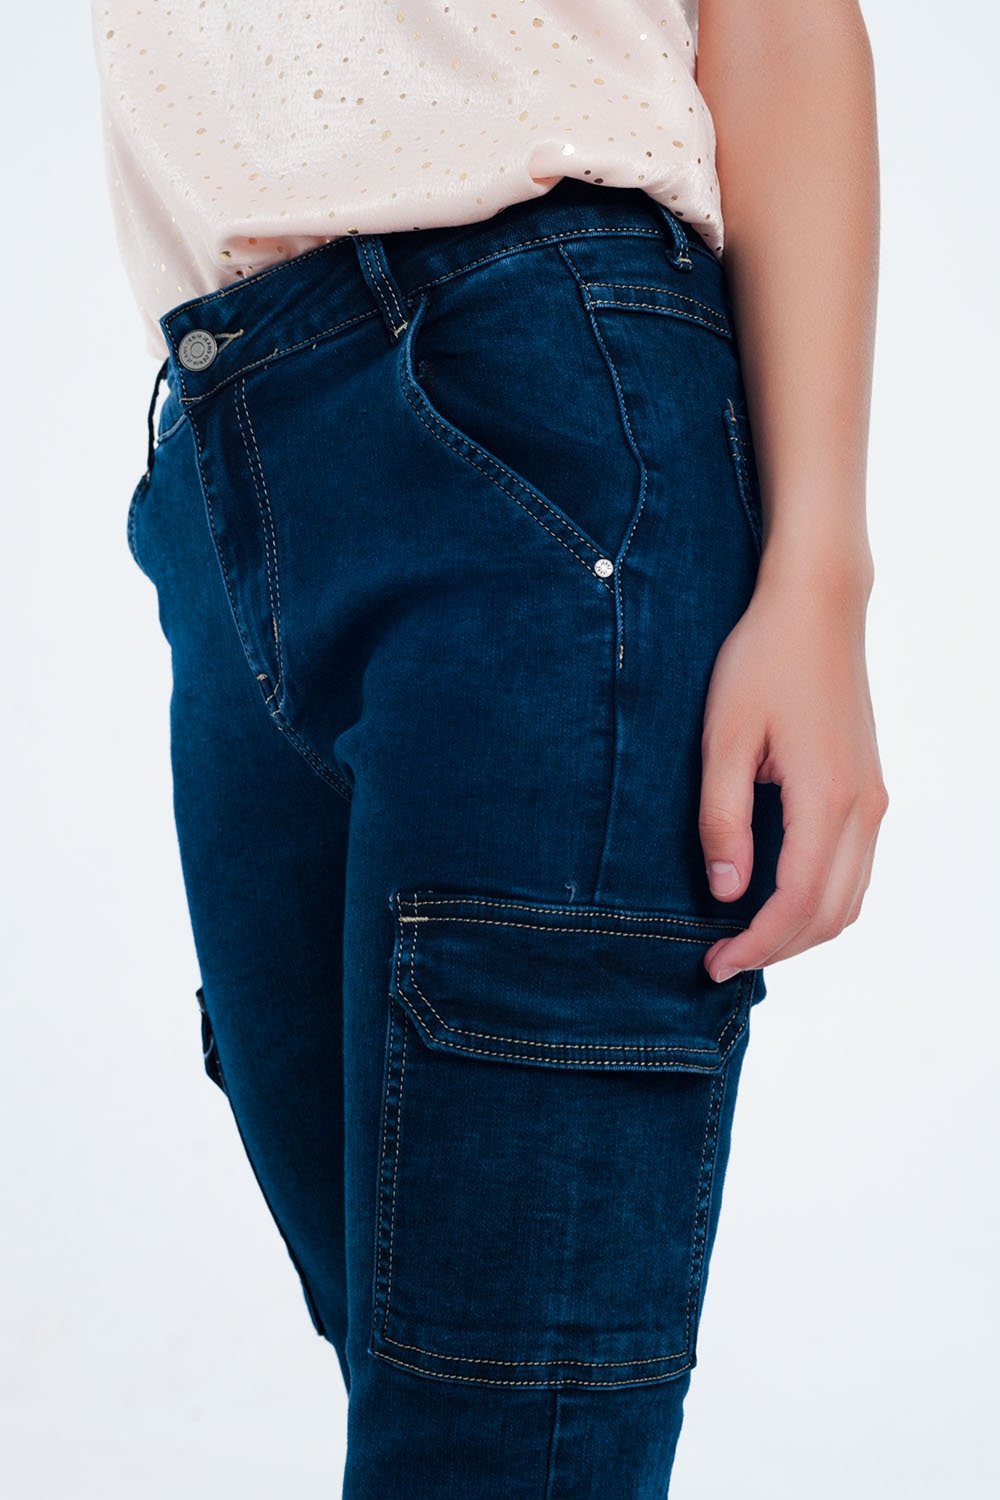 Jeans in Navy With Cargo Pockets